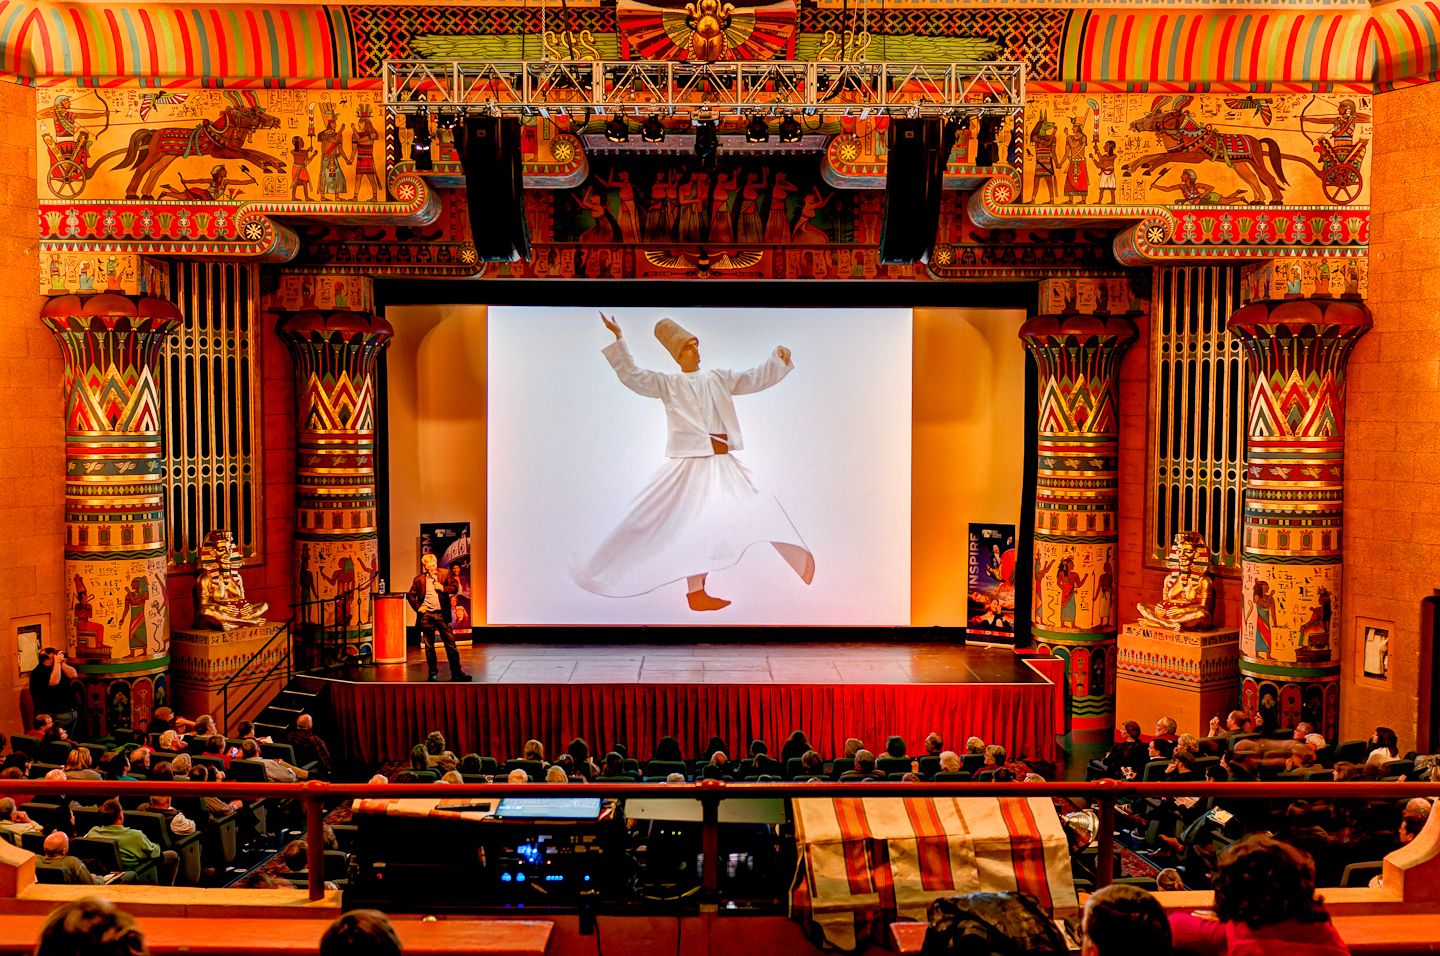 inside the Egyptian theatre in boise